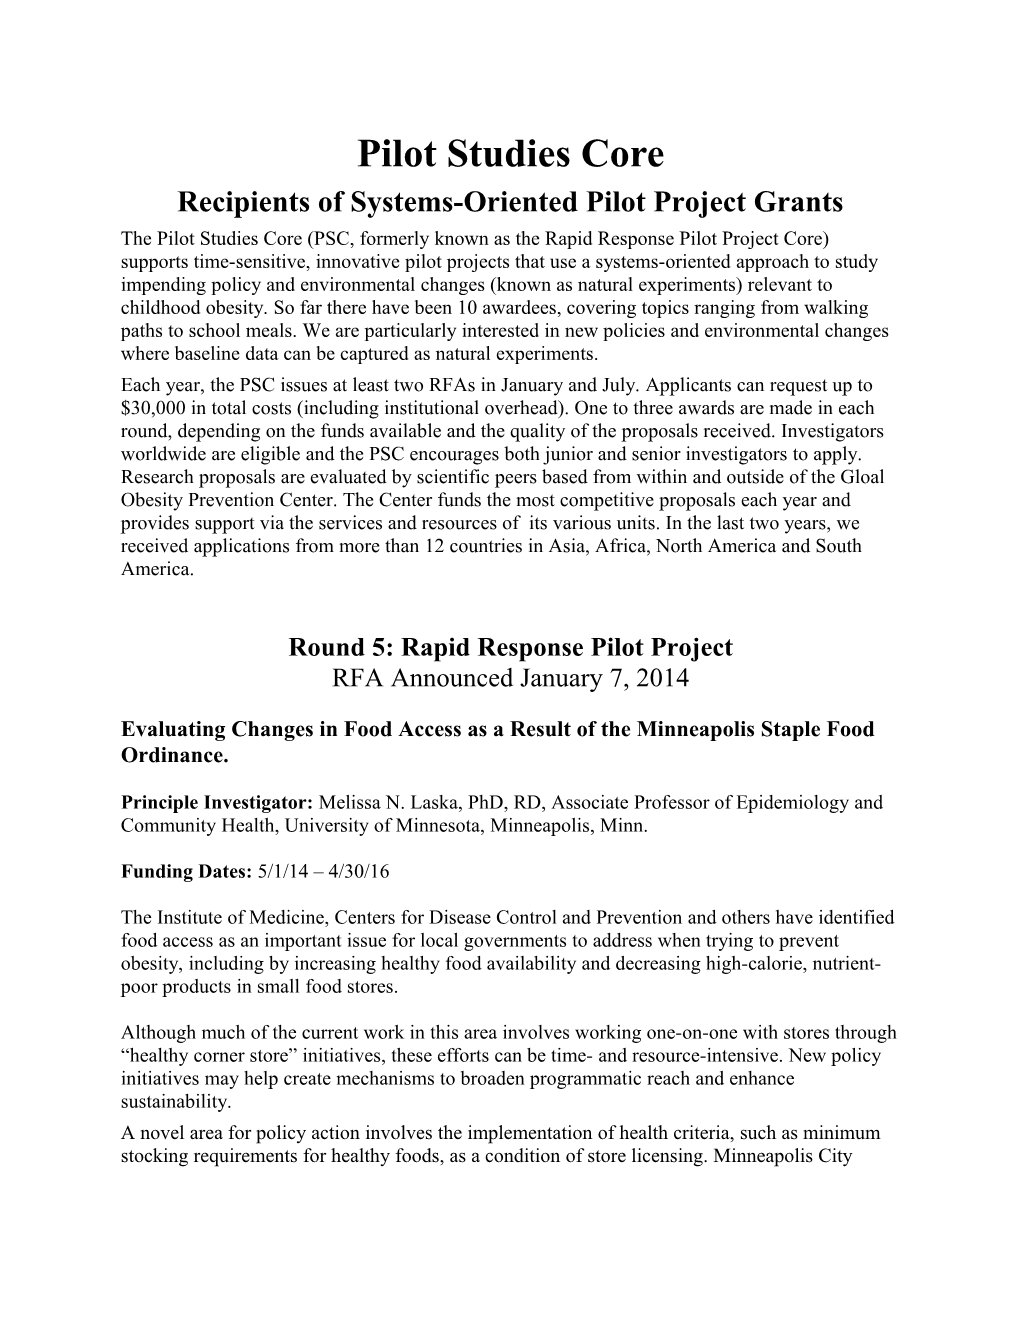 Recipients of Systems-Oriented Pilot Project Grants